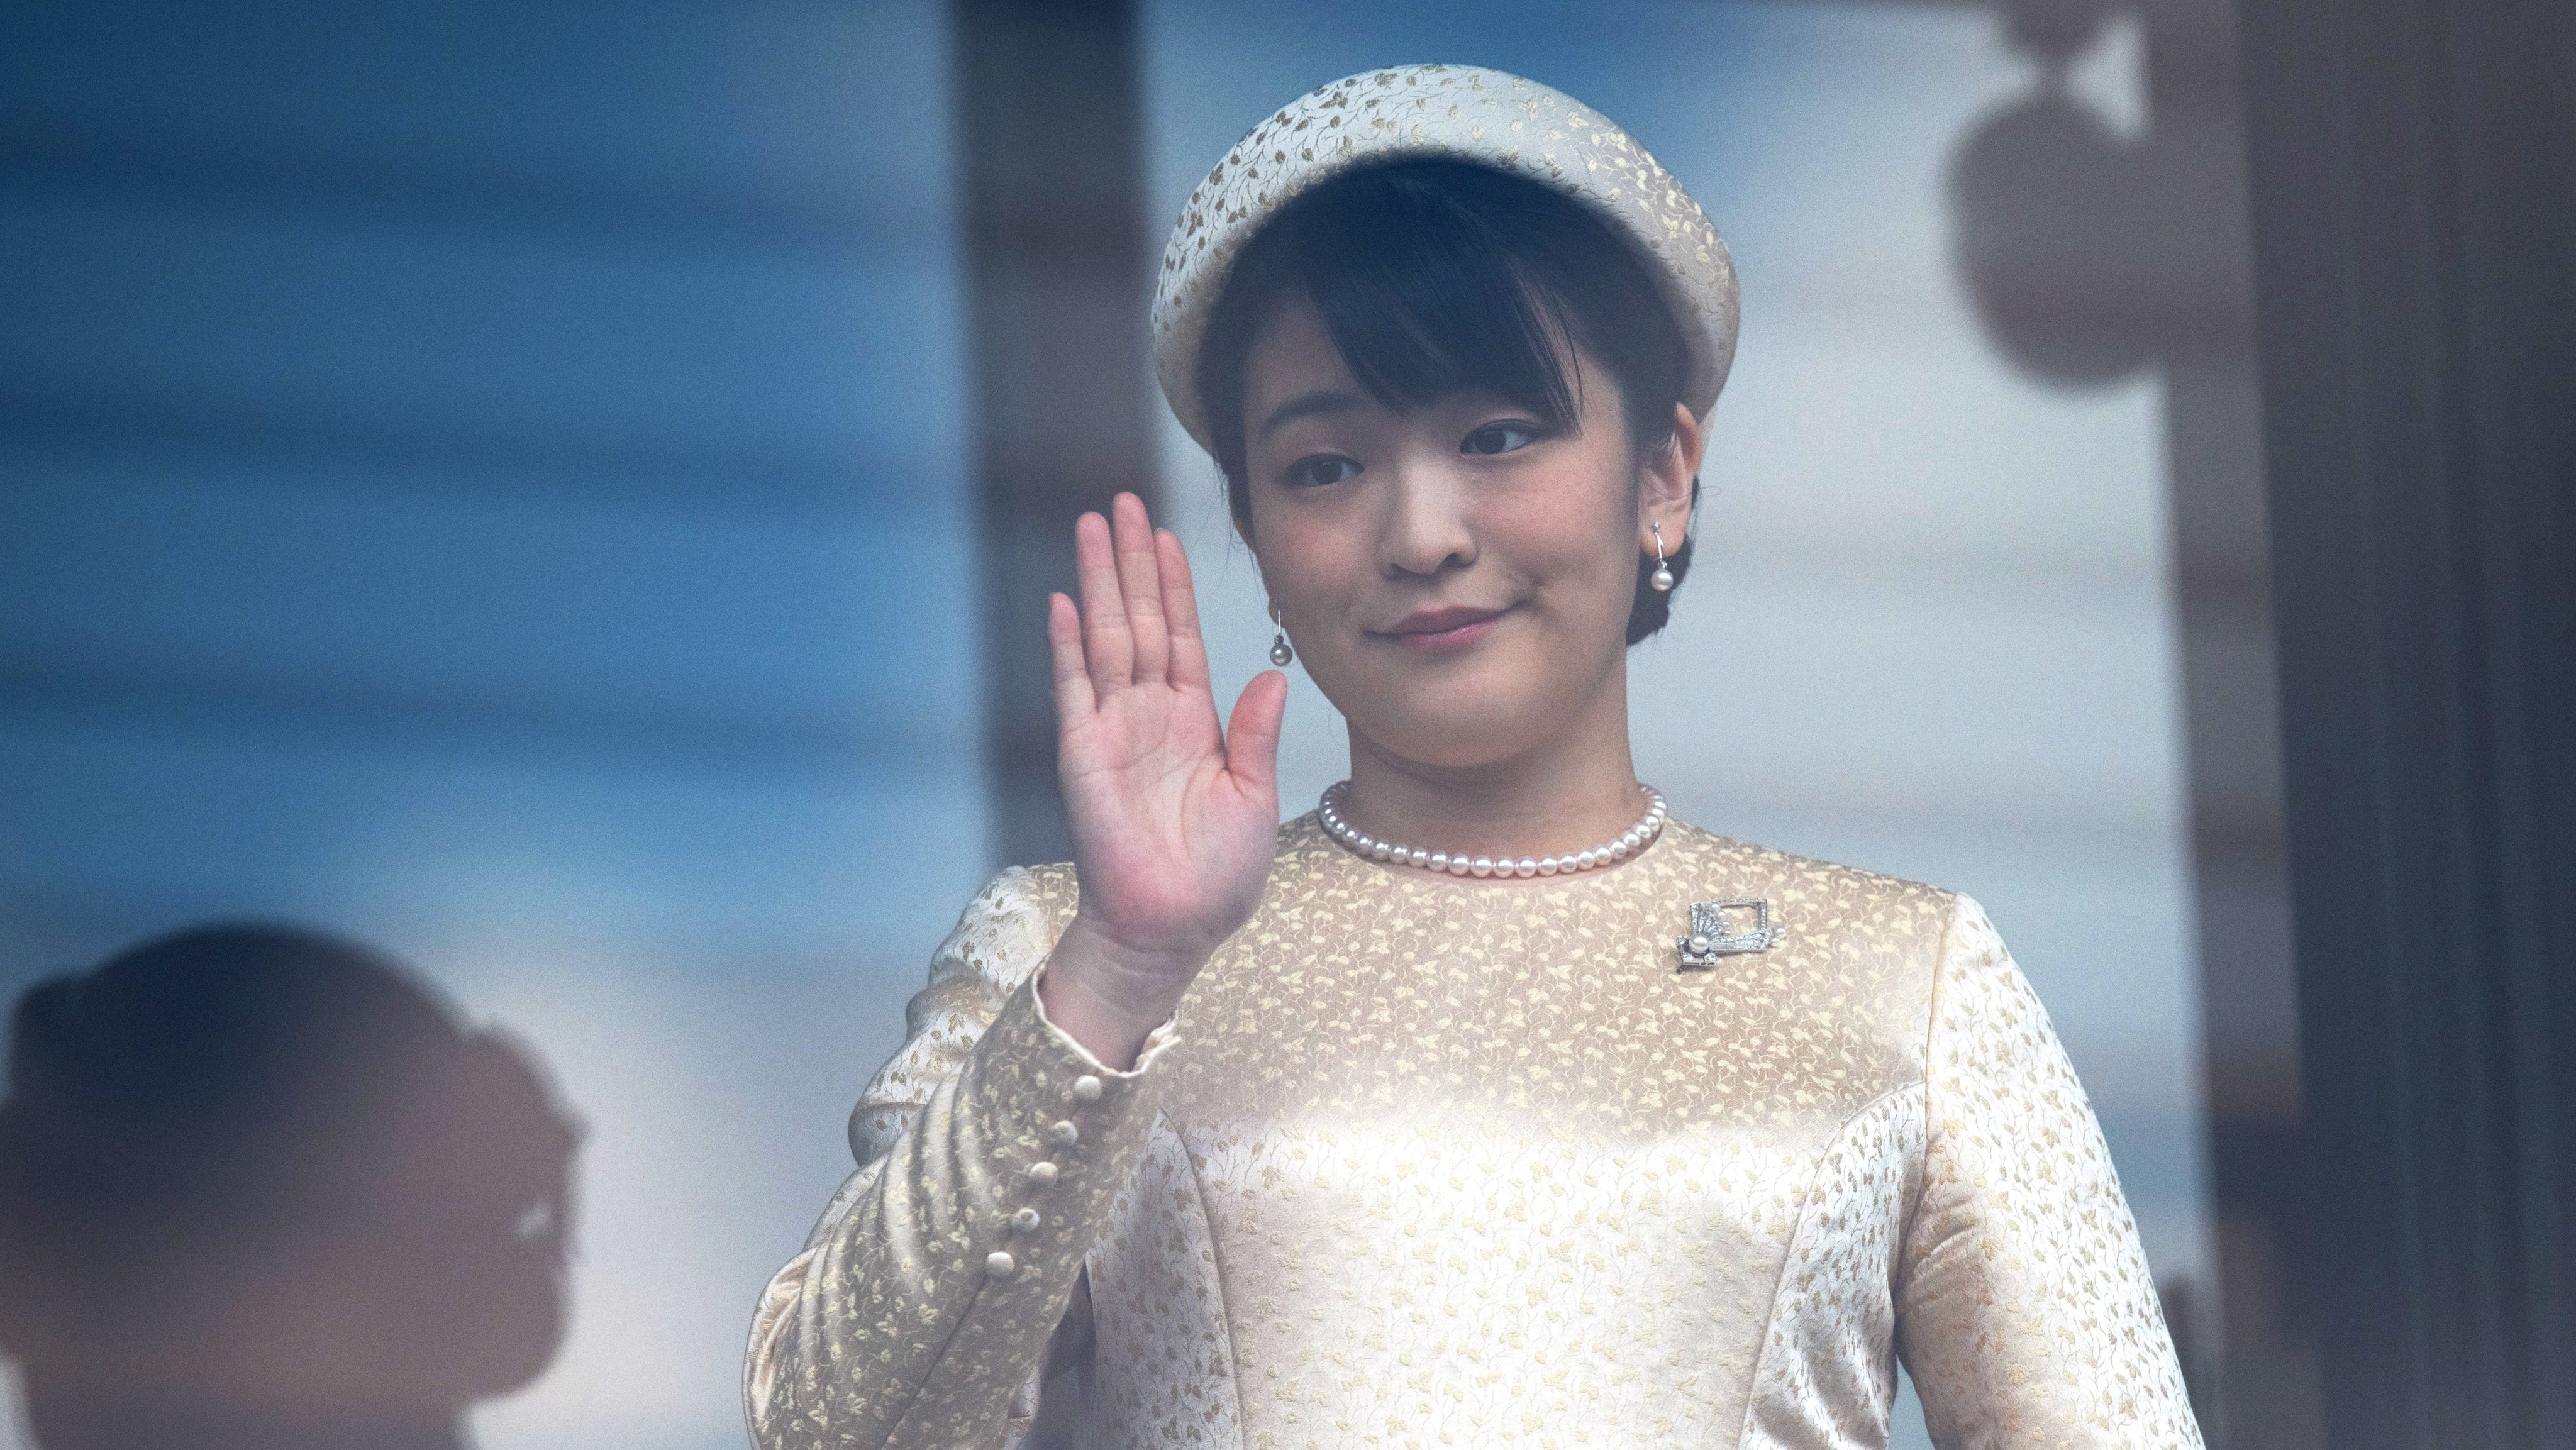 Emperor Naruhito Makes First Official Public Appearance Since Coronation